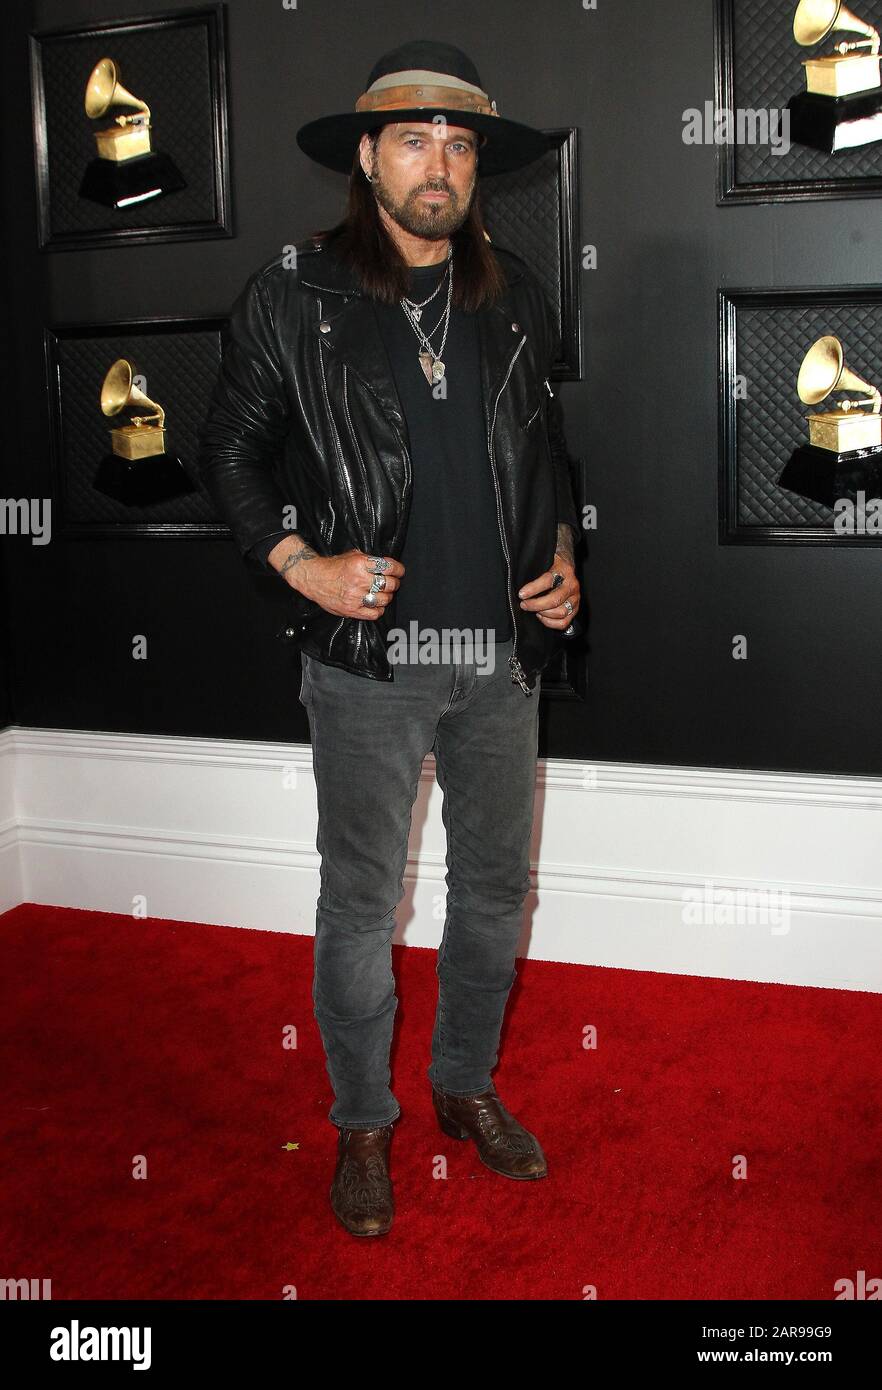 Los Angeles, USA. 26th Jan 2020. Billy Ray Cyrus. 62nd Annual GRAMMY Awards held at Staples Center. Photo Credit: AdMedia /MediaPunch Credit: MediaPunch Inc/Alamy Live News Stock Photo